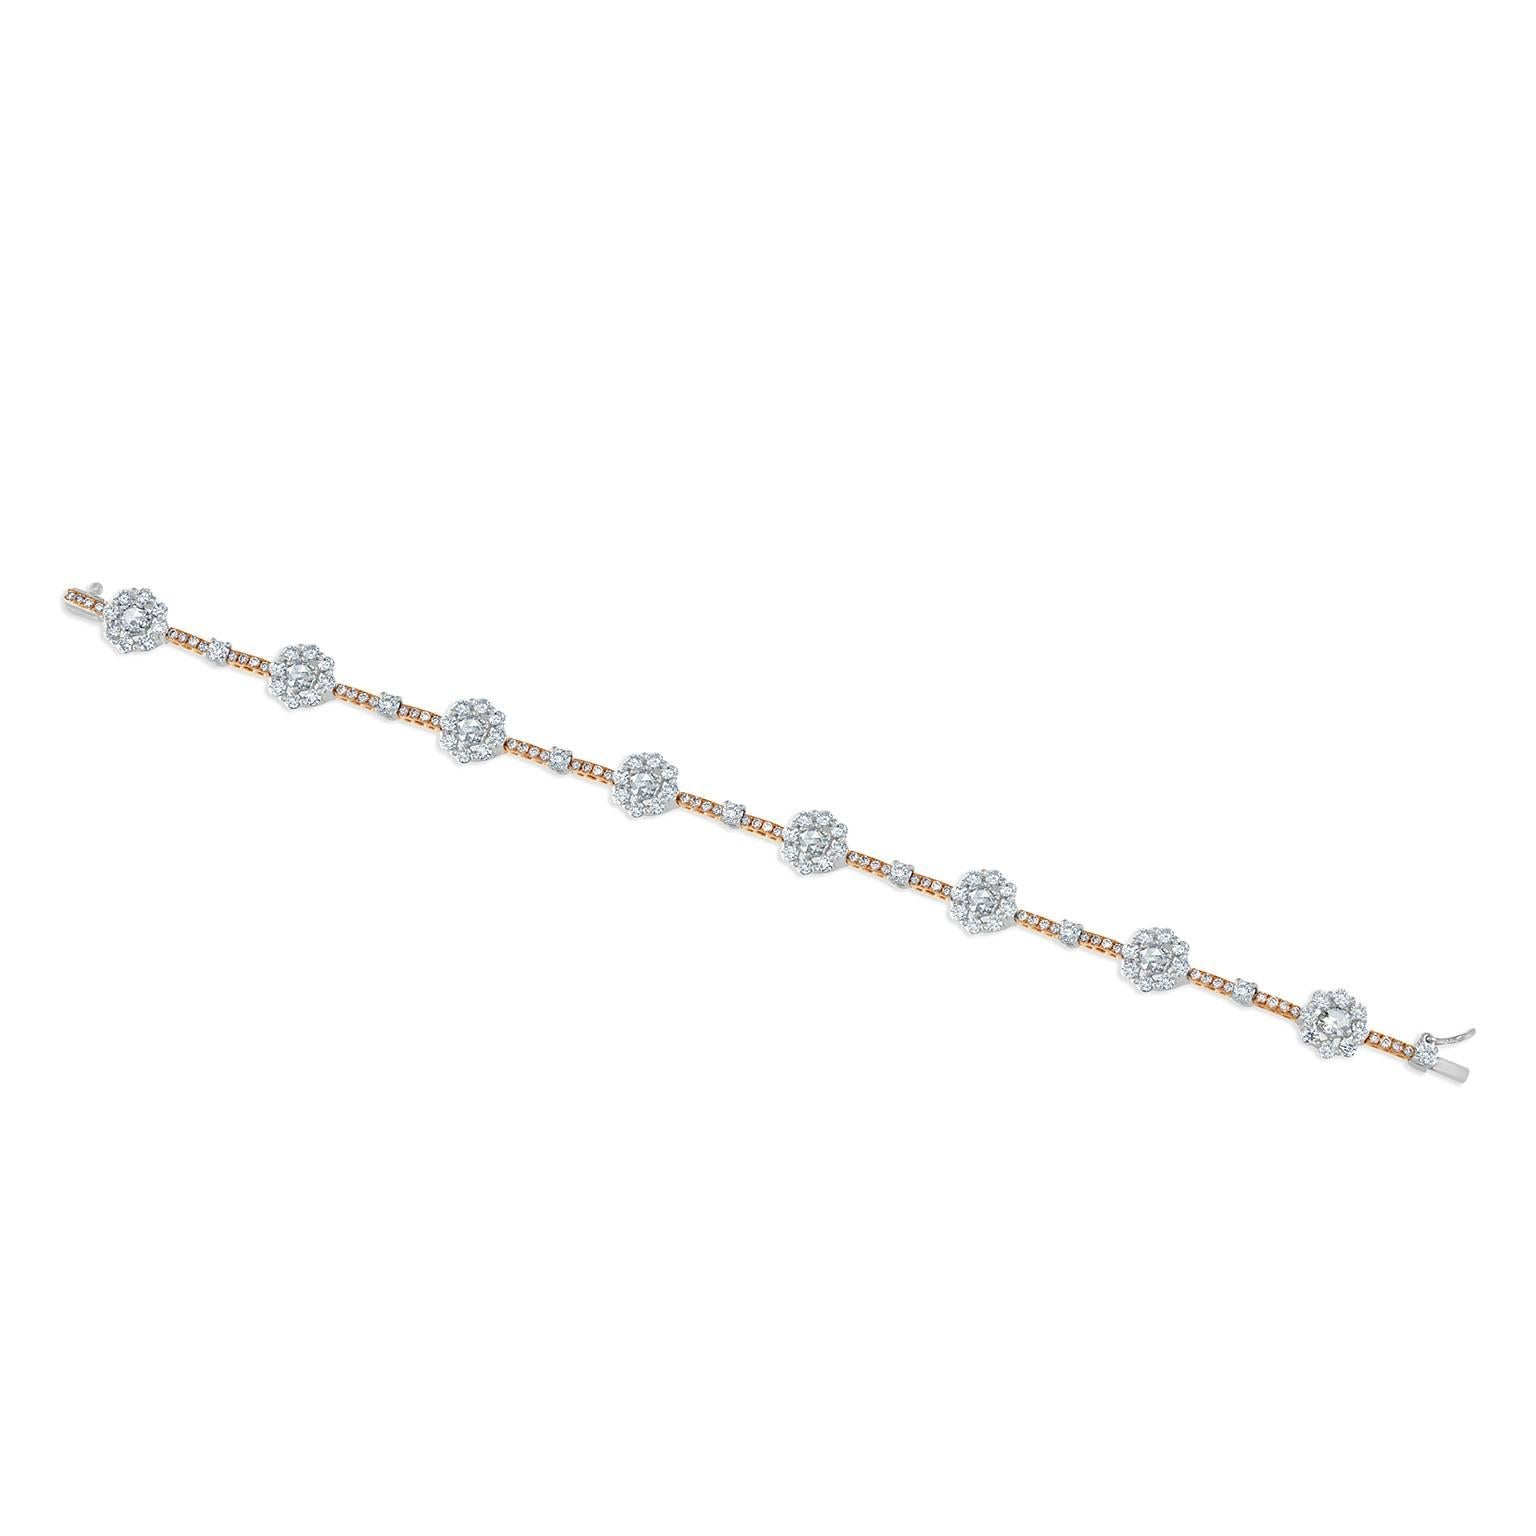 This superb diamond bracelet features 8- rose cut diamonds, 64- round brilliant cut natural fancy pink diamonds and 72- round brilliant cut diamonds weighing 4.00 carats total. Set in 18 karat white and rose gold, measuring 6.5 inches in length.